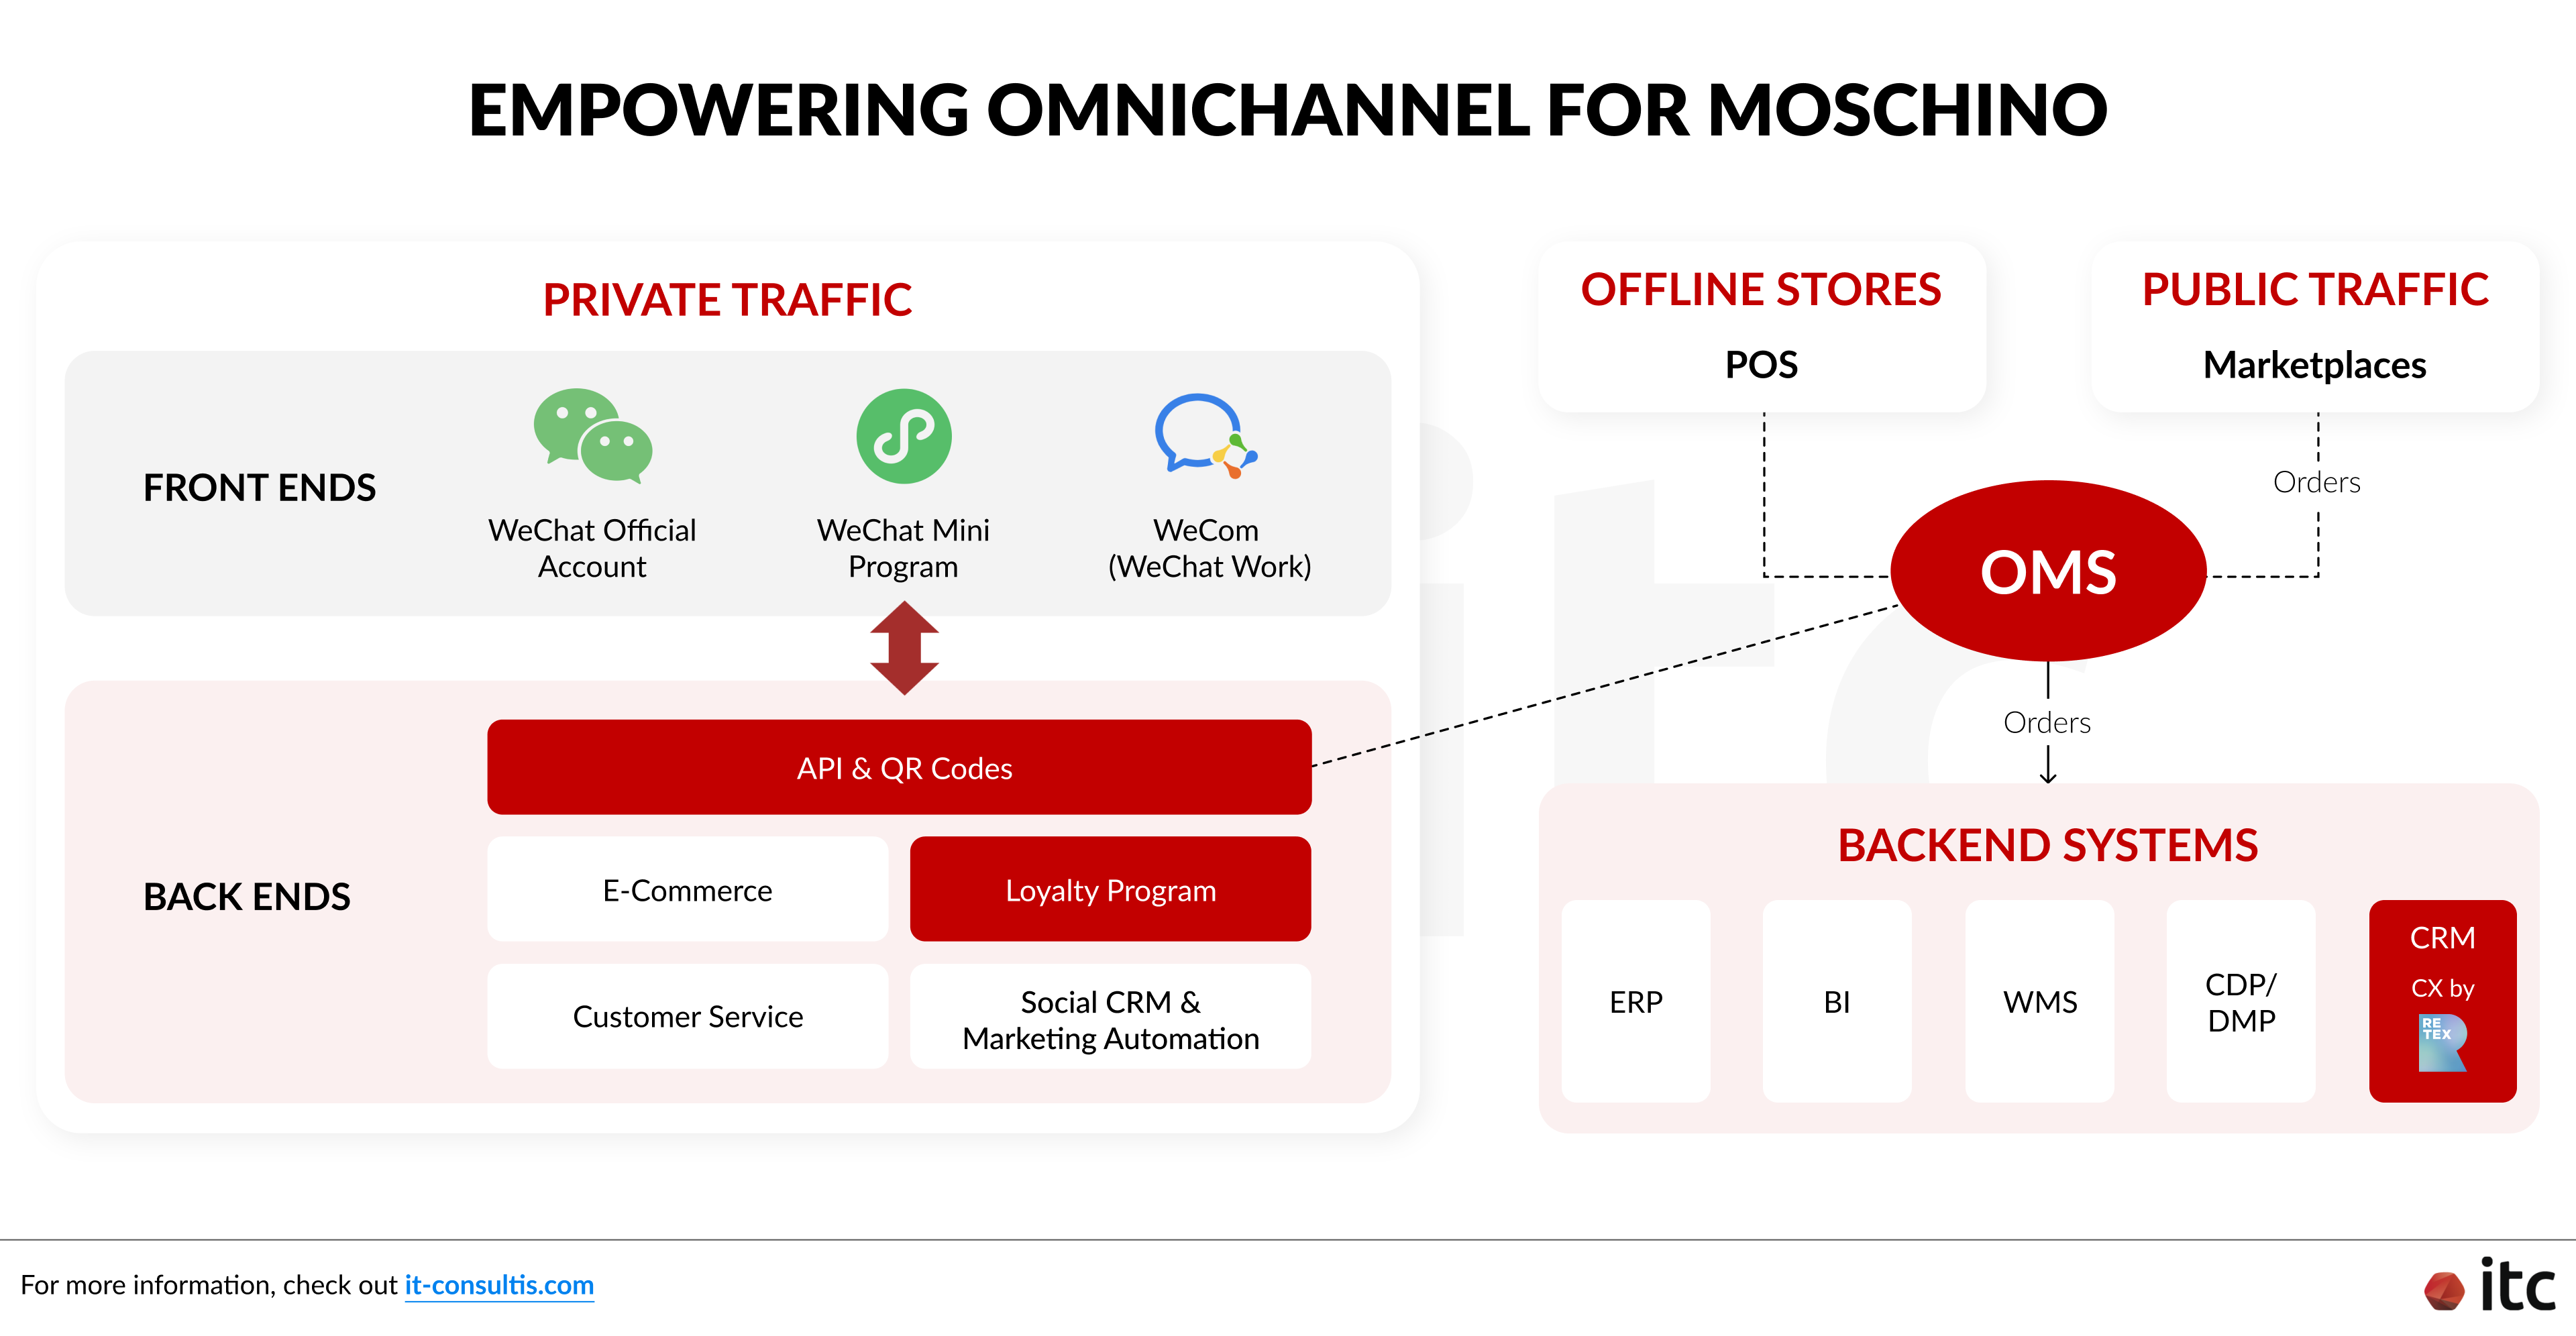 Empowering Omnichannelity for Moschino with private traffic management via Marketing Automation & Social CRM, WeCom clienteling, and loyalty program